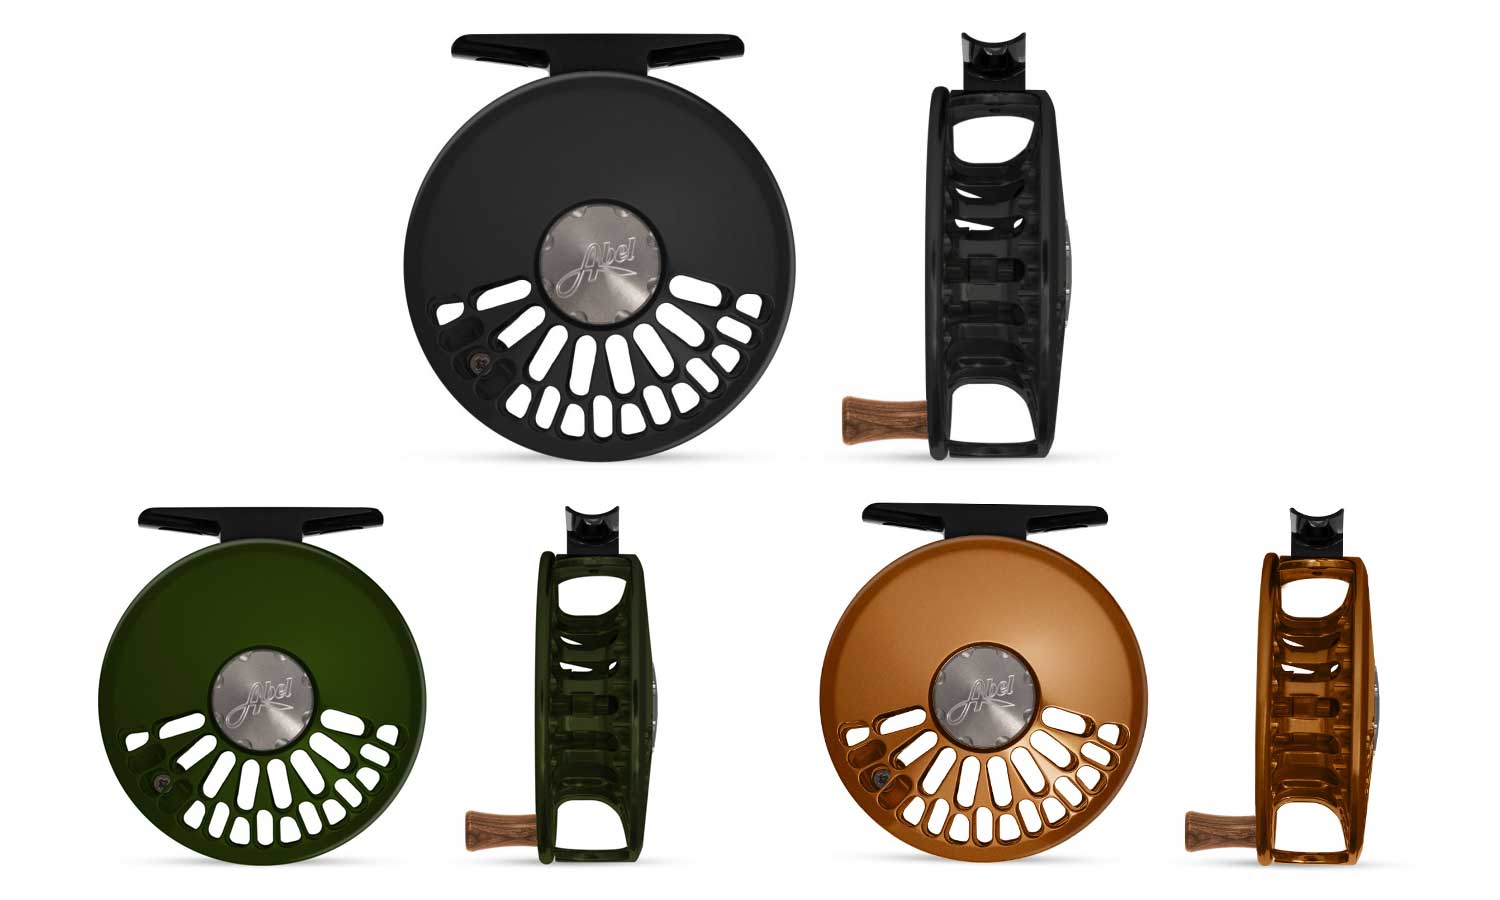 Abel TR Series Reels at The Fly Shop